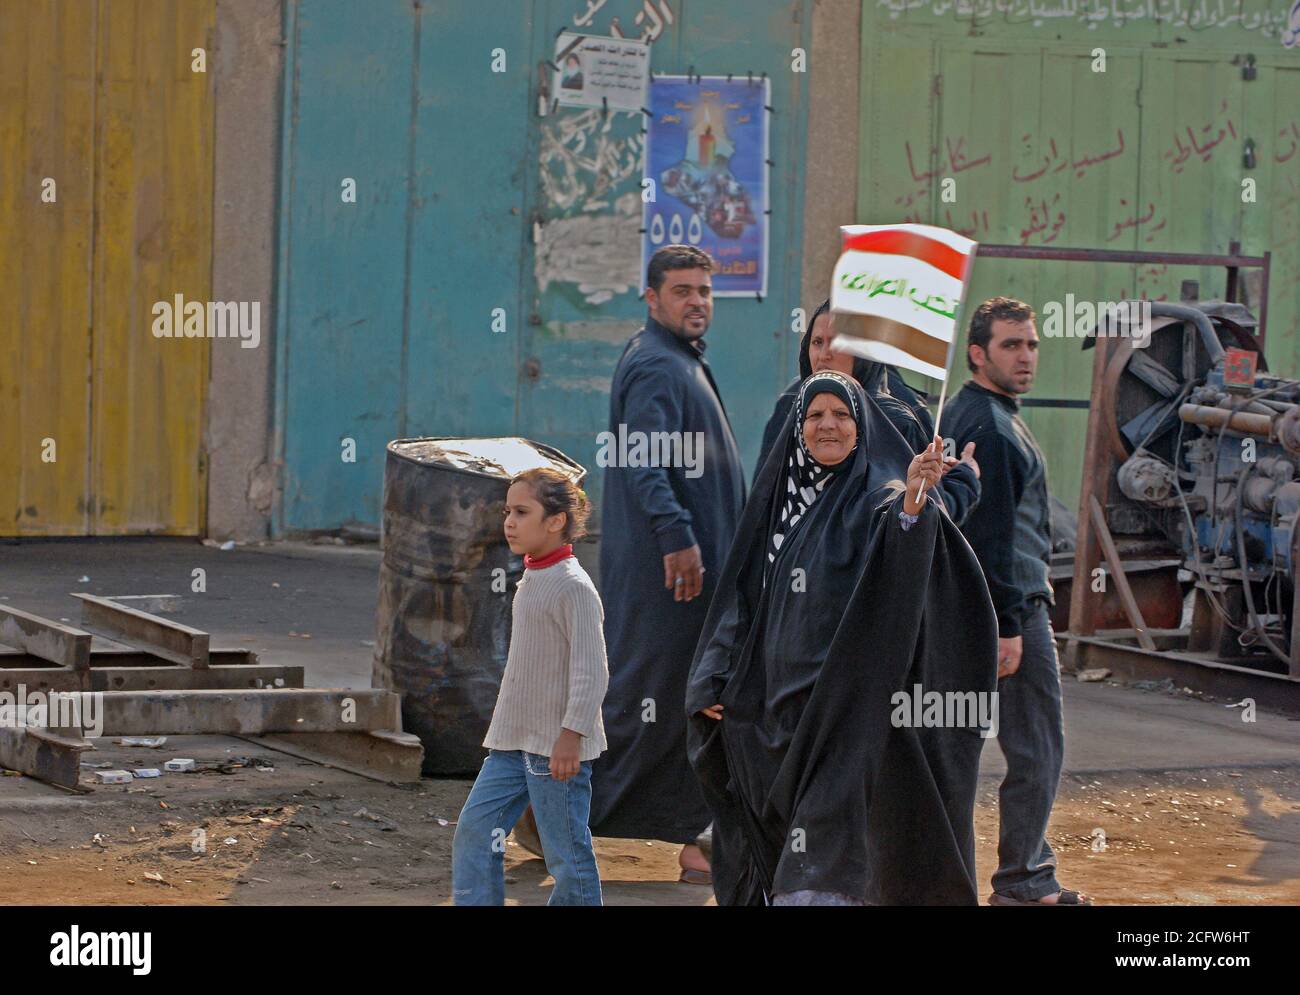 On the streets of Baghdad, Iraq happy citizen blew there horns, cheered, and proudly waved the national flag as they walked through the streets. Stock Photo